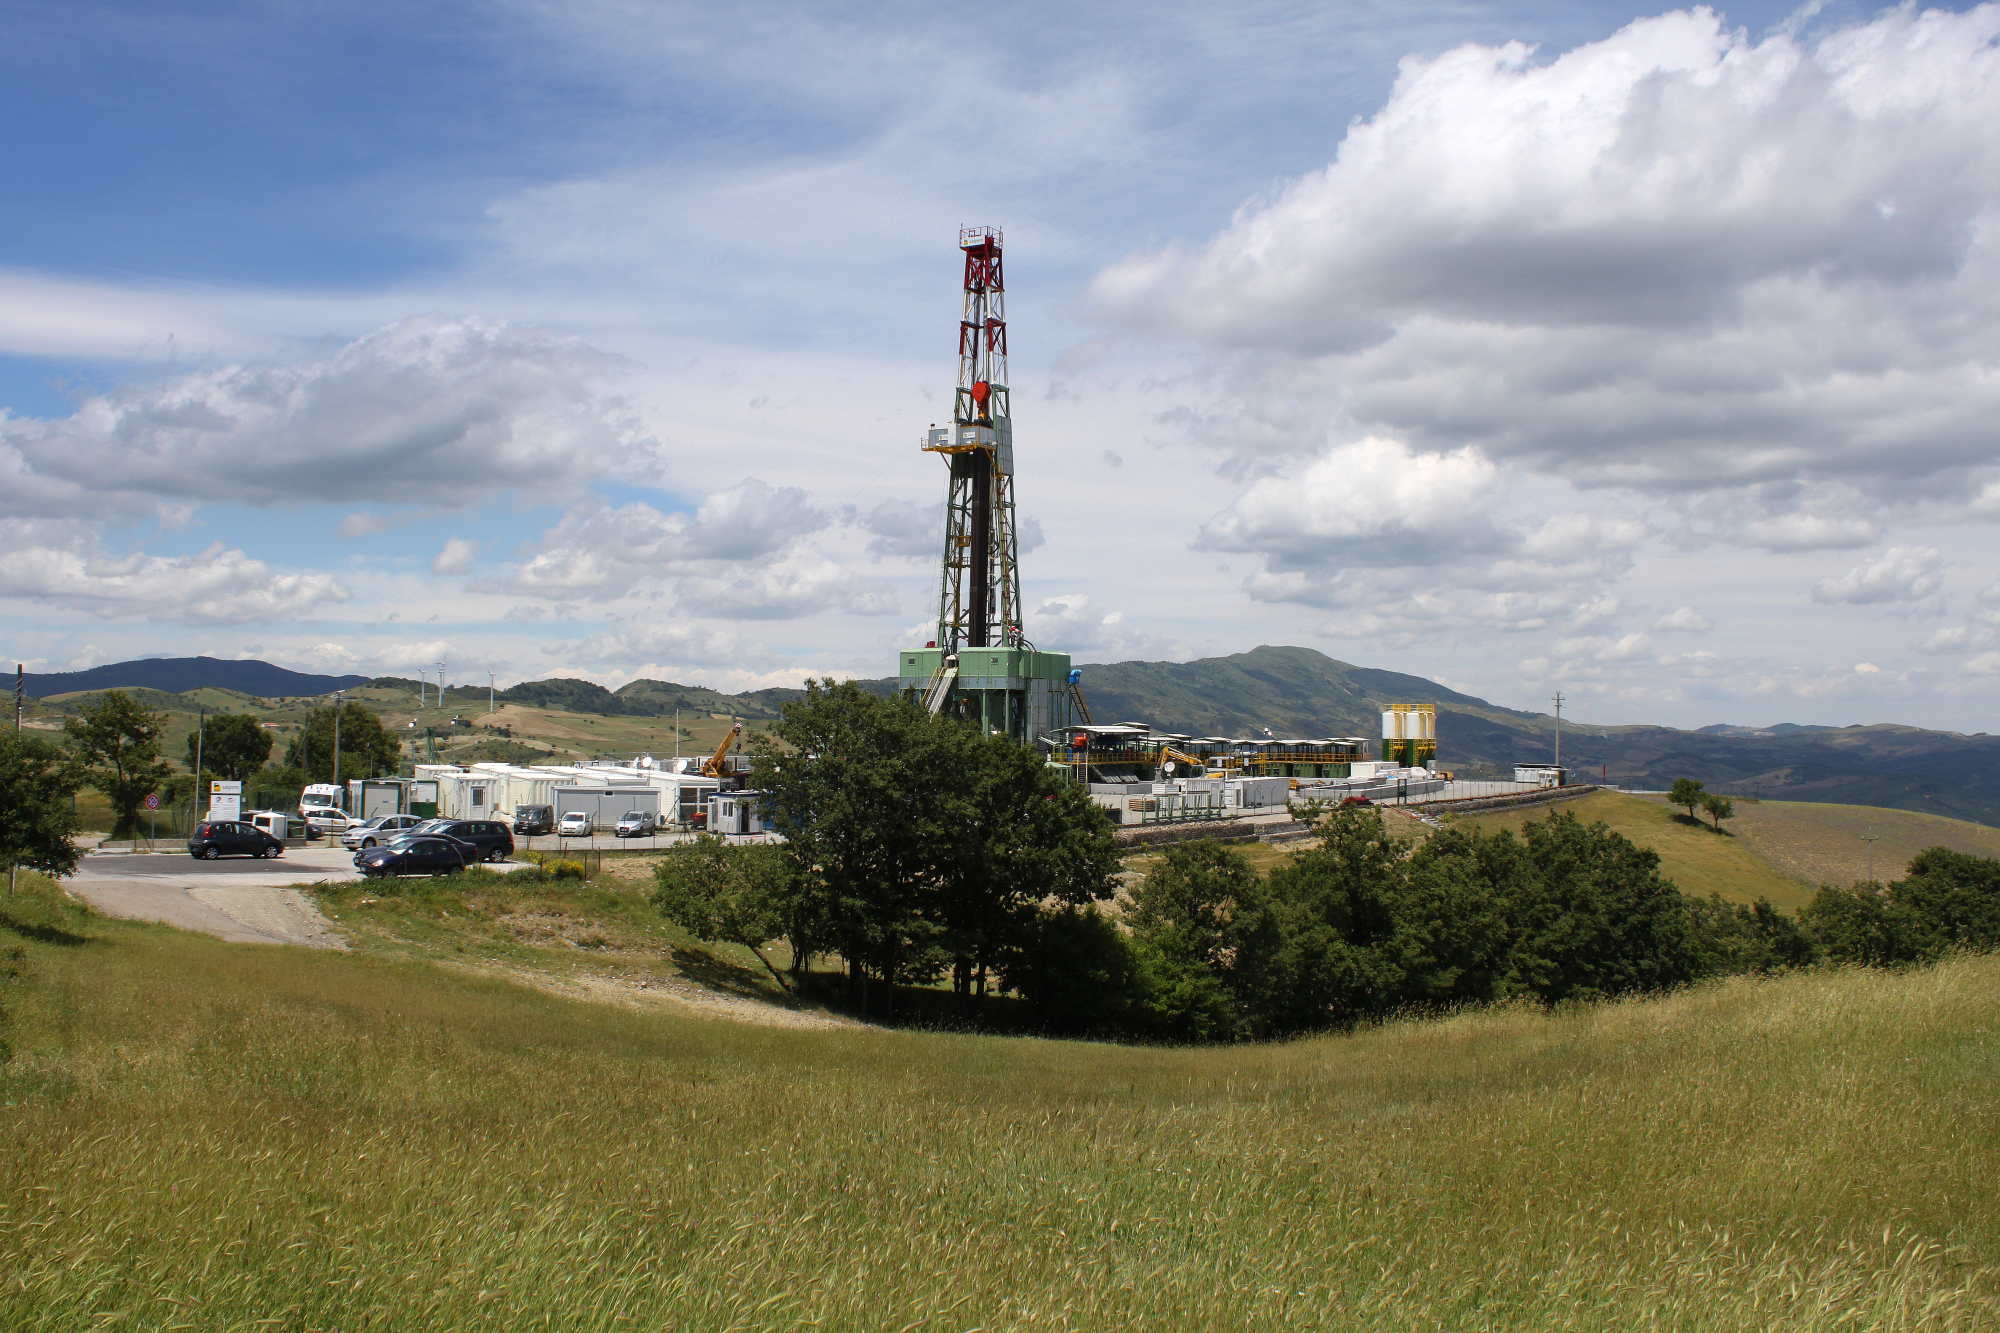  Tempa Rossa Oil Field  Monte Vulture Pictures Italy 